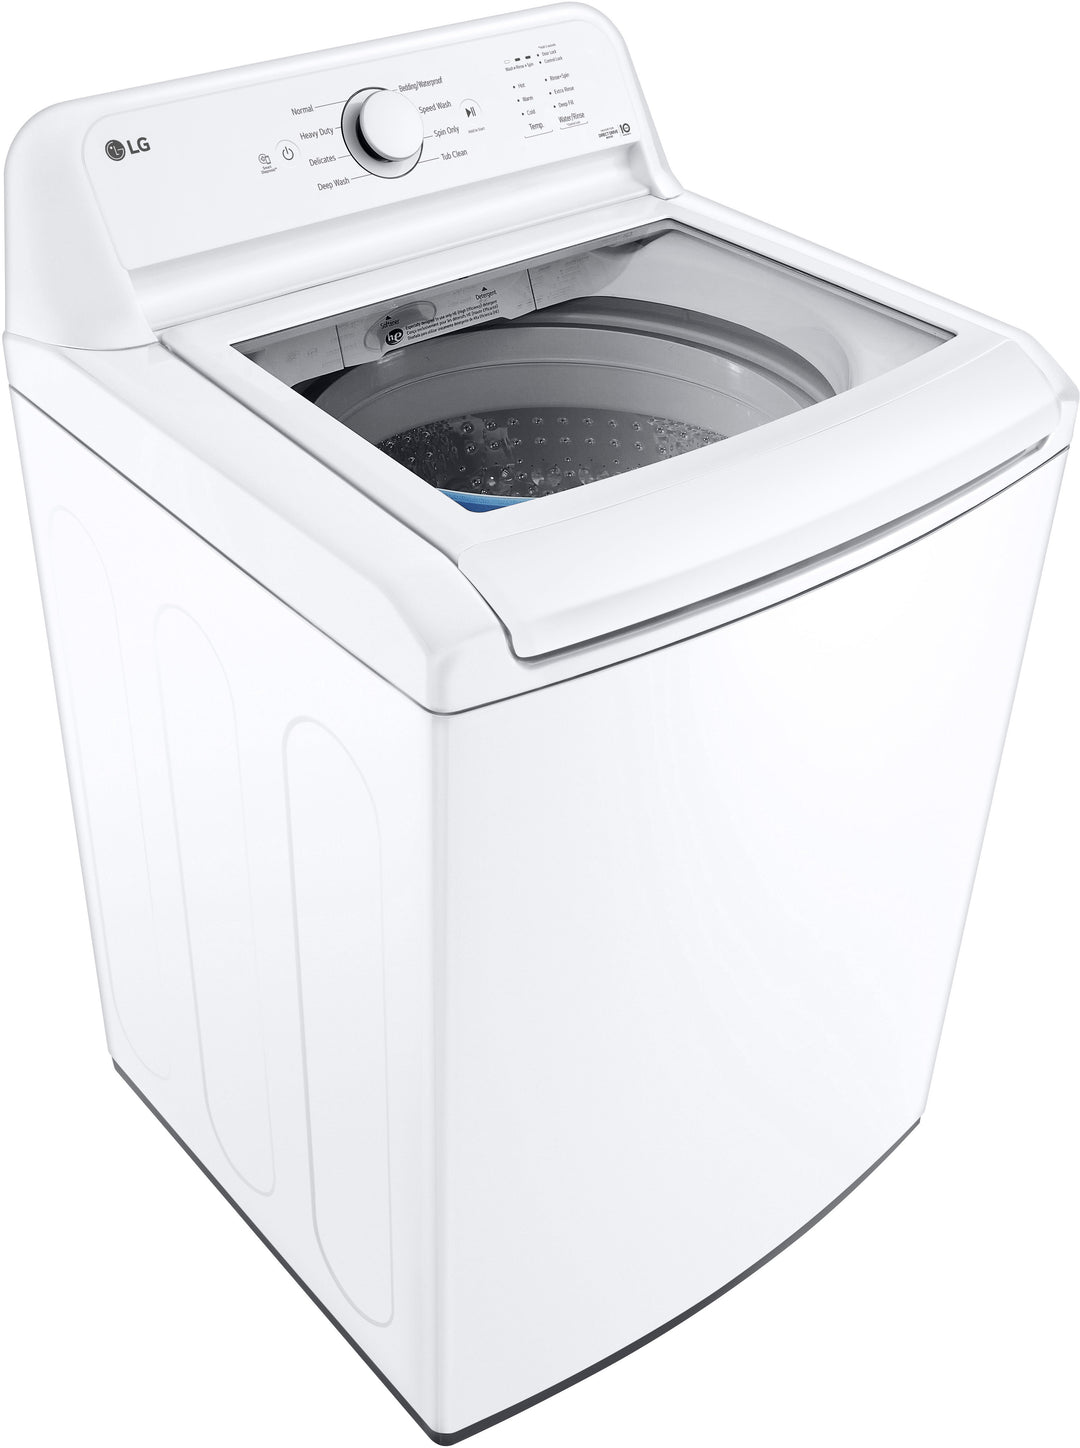 LG - 4.1 Cu. Ft. Smart Top Load Washer with SlamProof Glass Lid - White_1